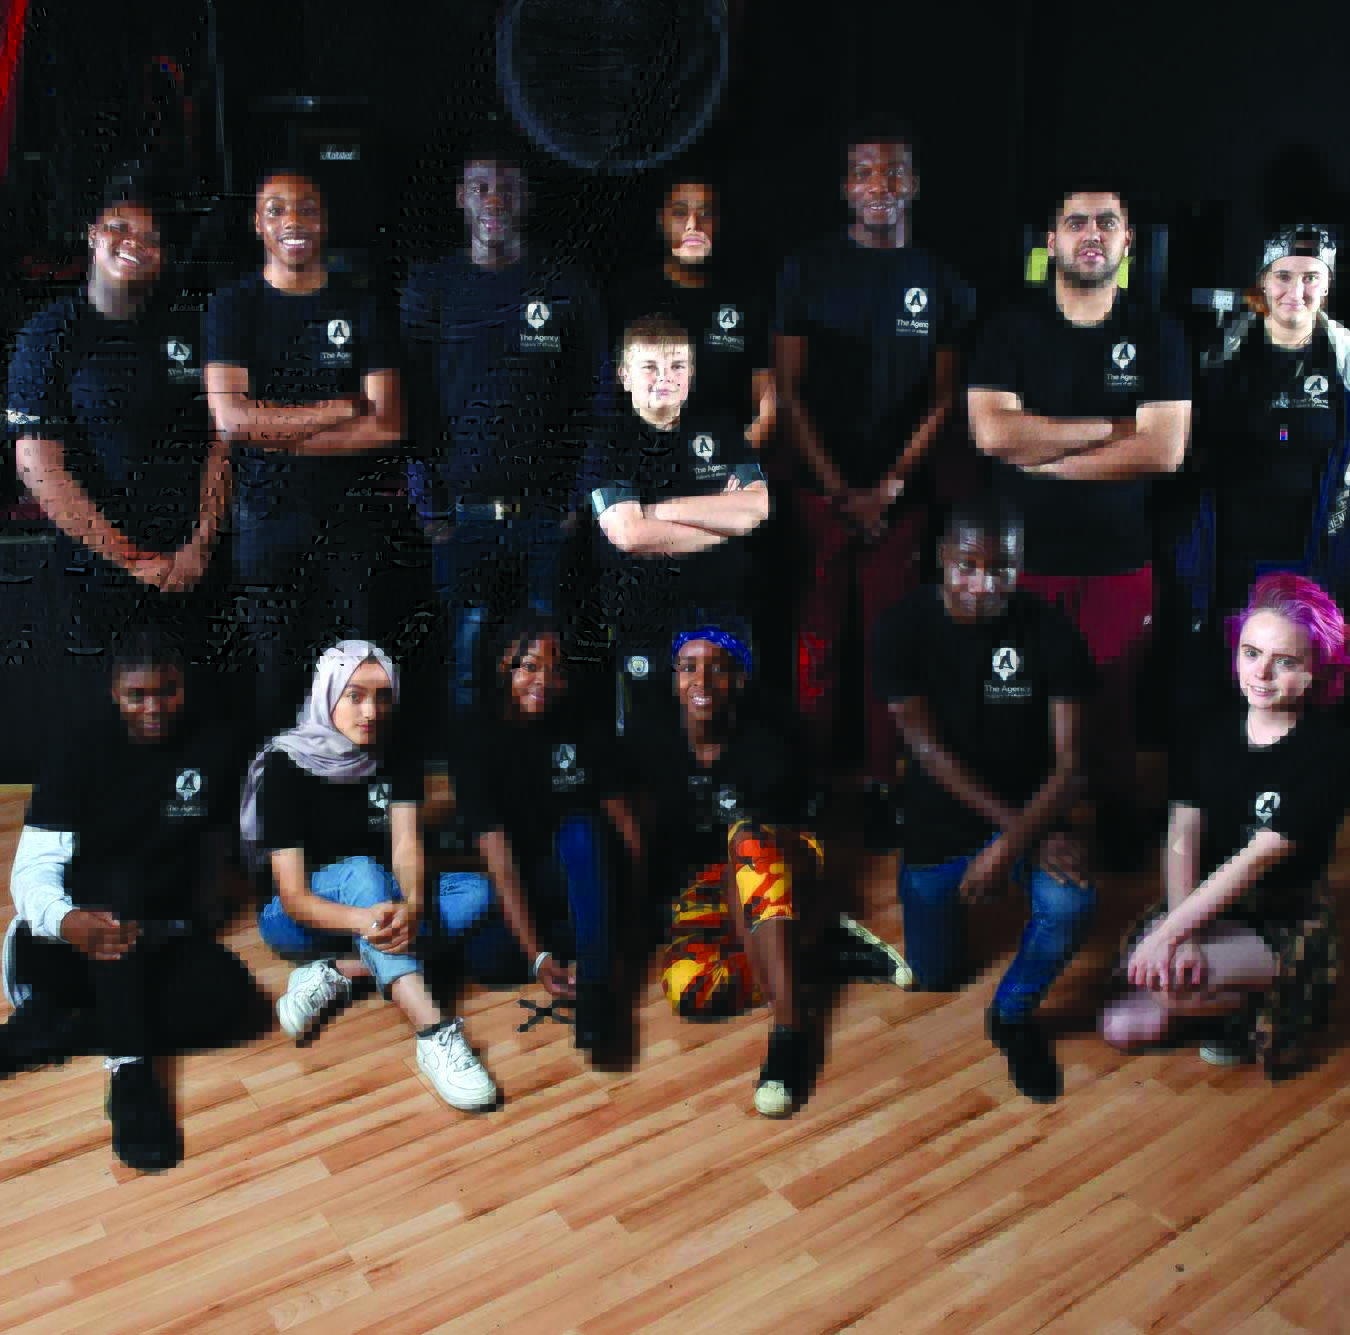 A group of young people, pictured indoors in a posed group wearing black Contact Theatre t-shirts